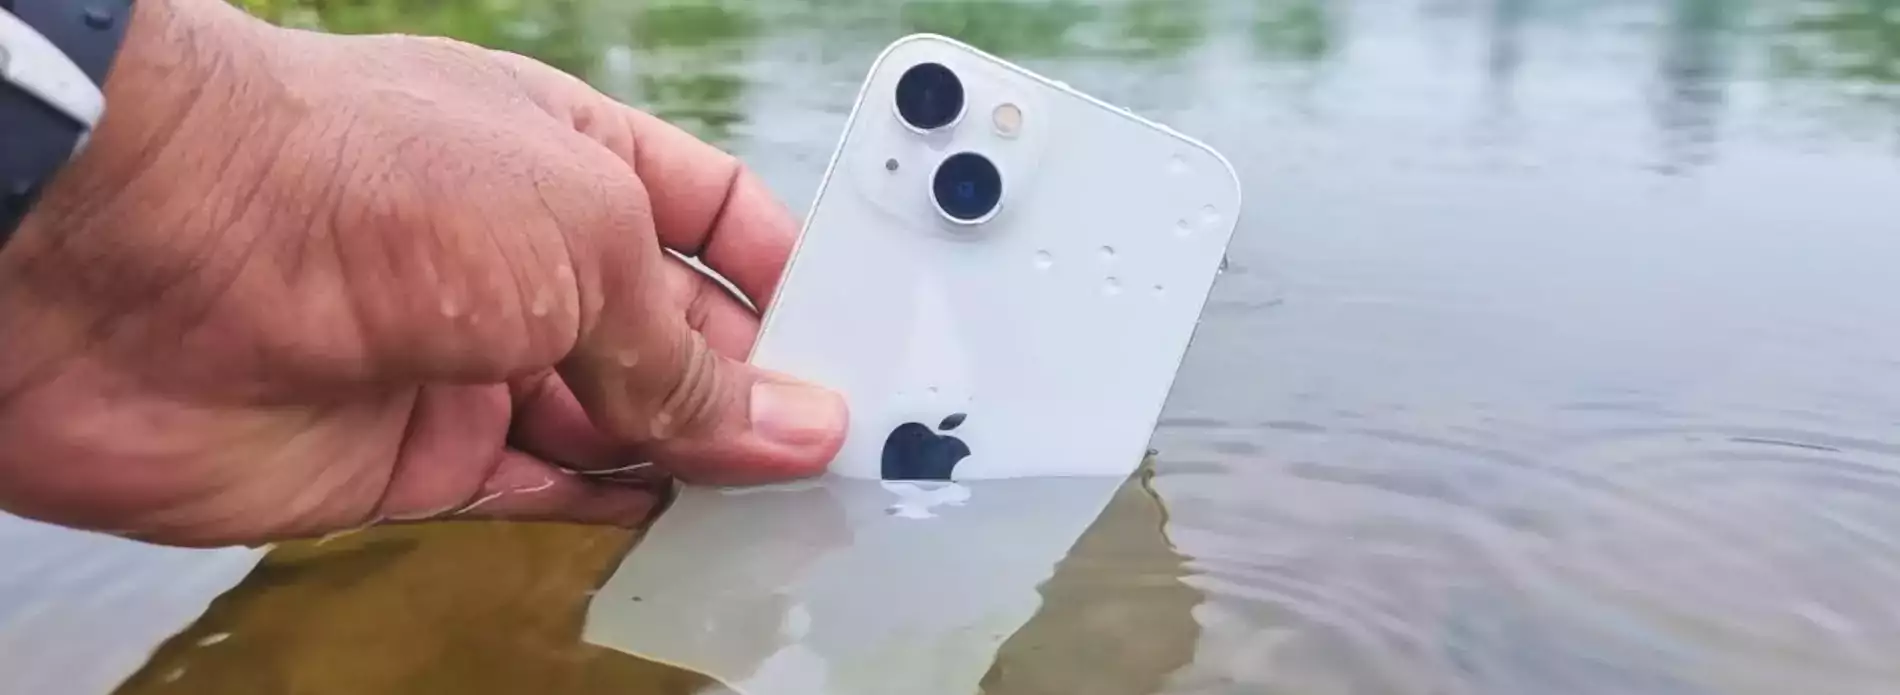 iPhone water resistance